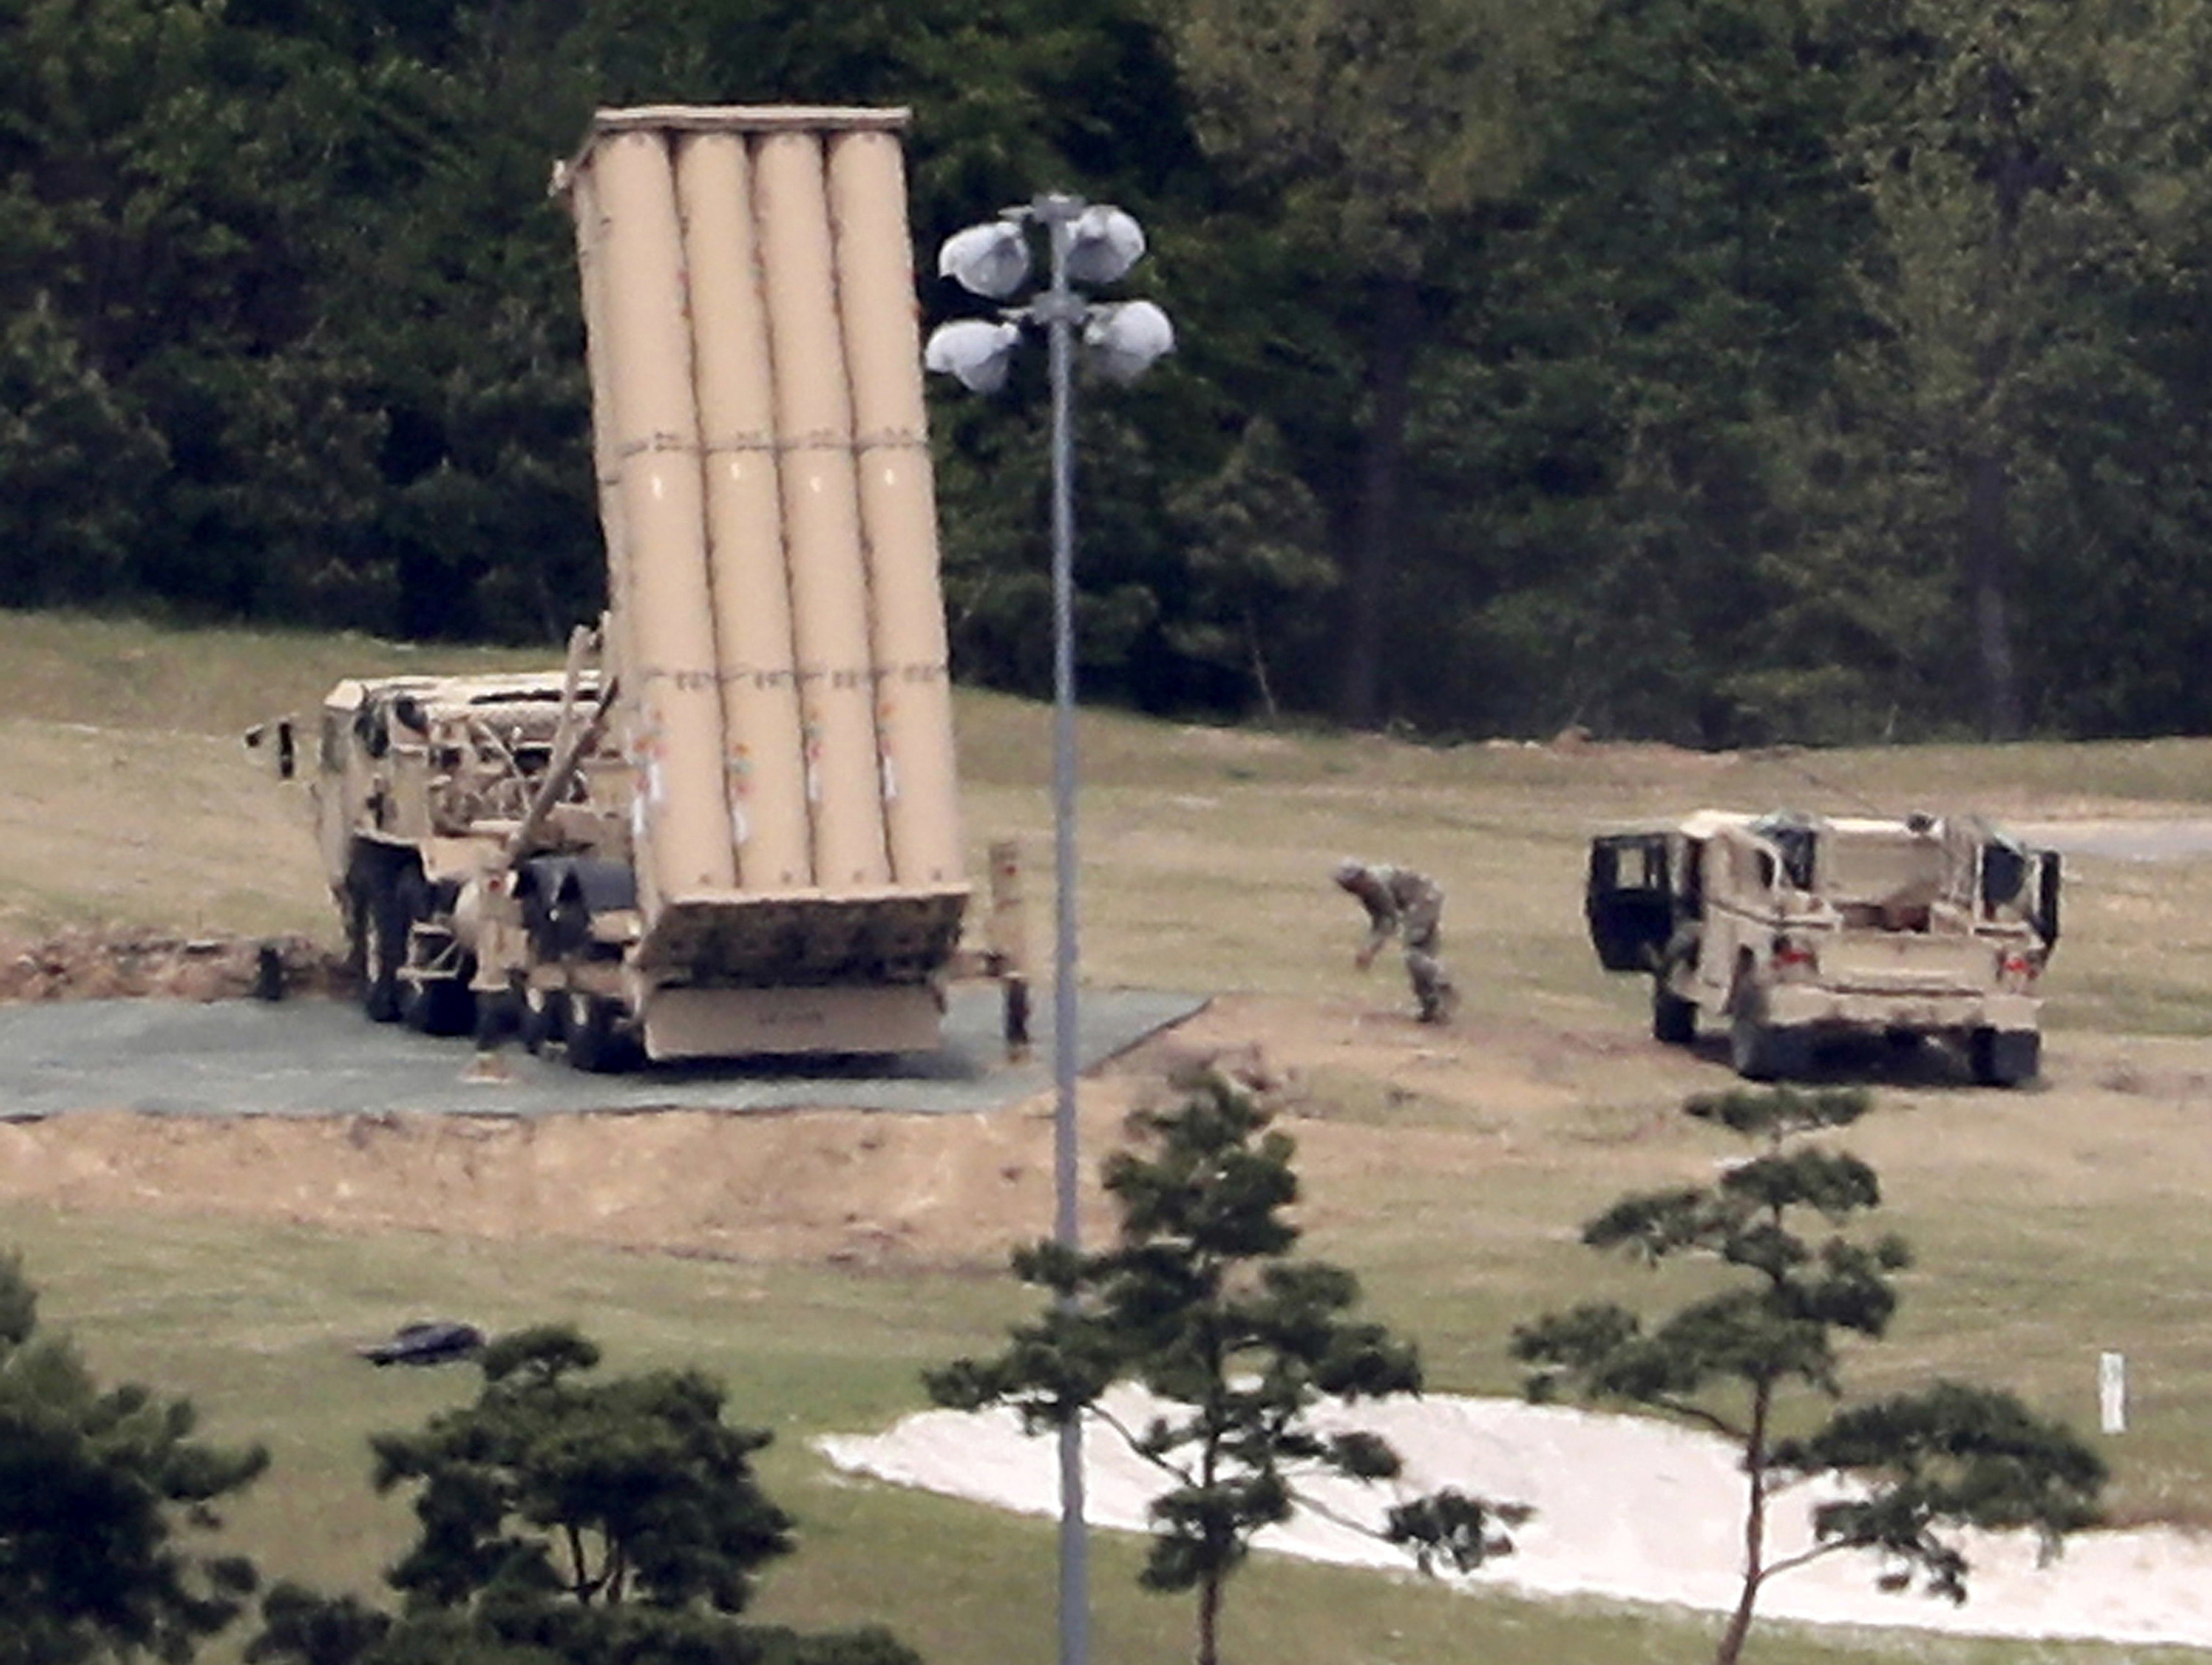 Sceptics find it hard to believe the president is really ‘shocked’ at the arrival of more parts for the US missile system; they say he’s either playing to China and North Korea, or preparing to withdraw it